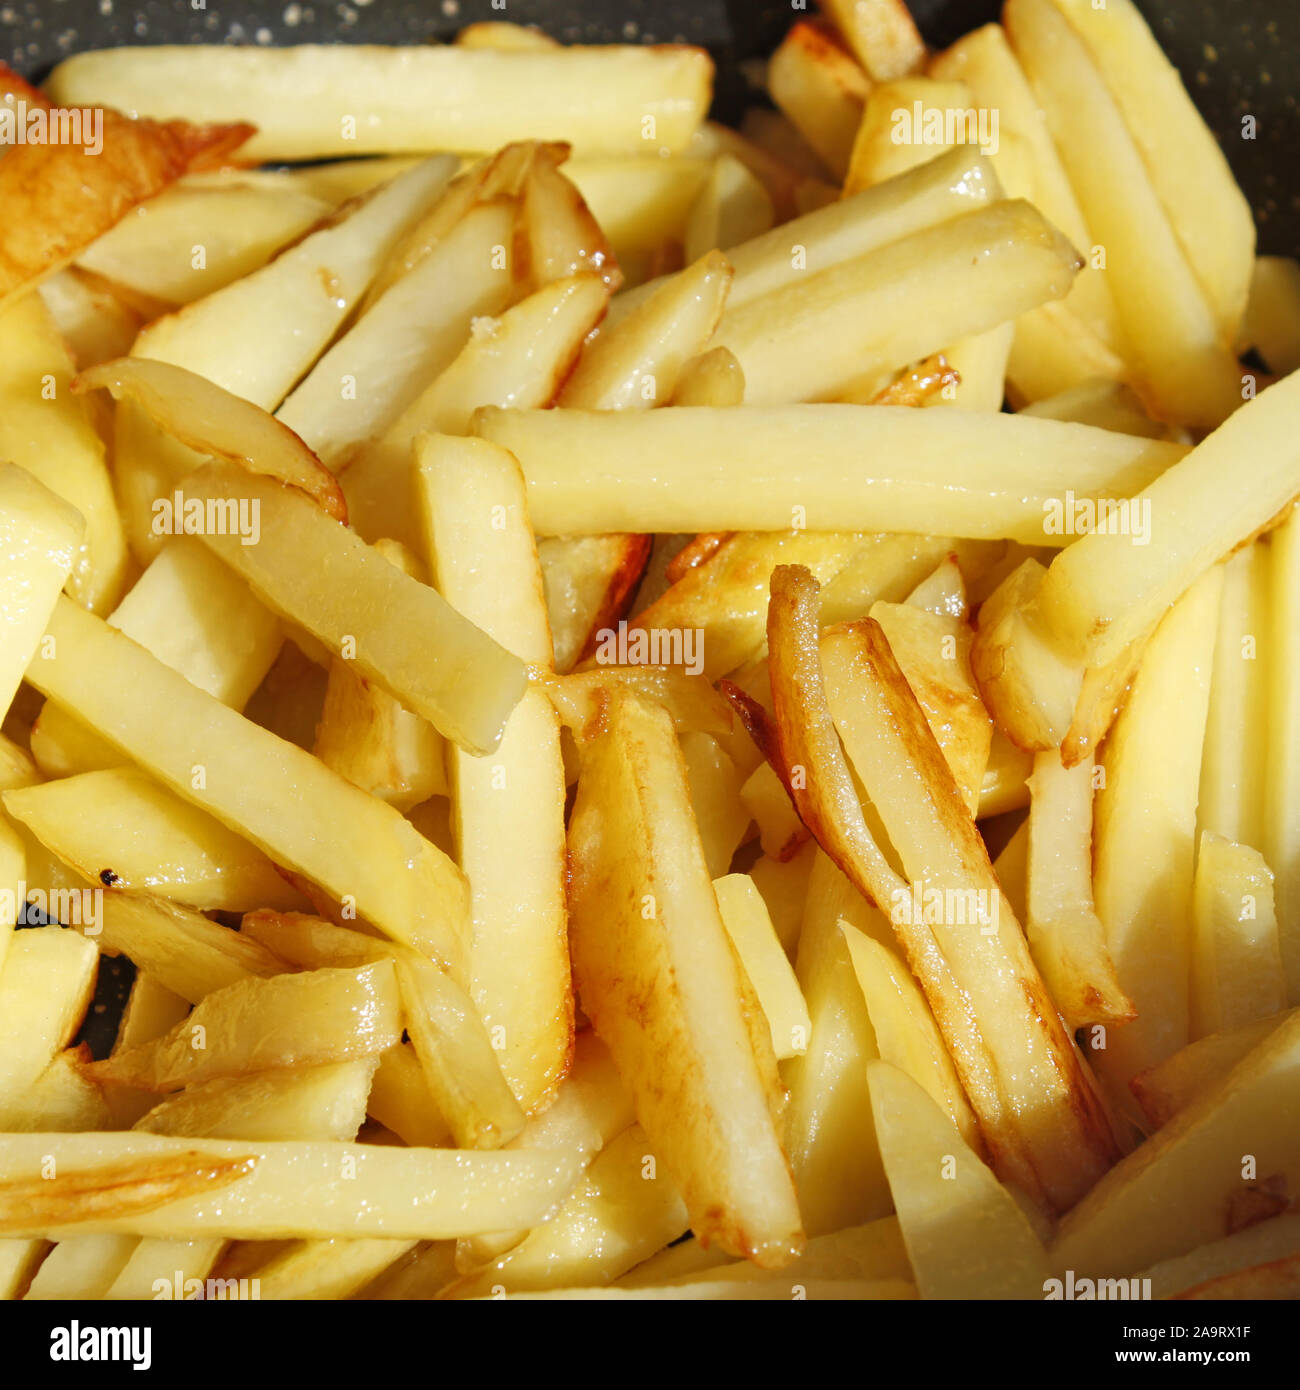 Heap of appetizing roasted potato chips close-up, in bright sunlight Stock Photo